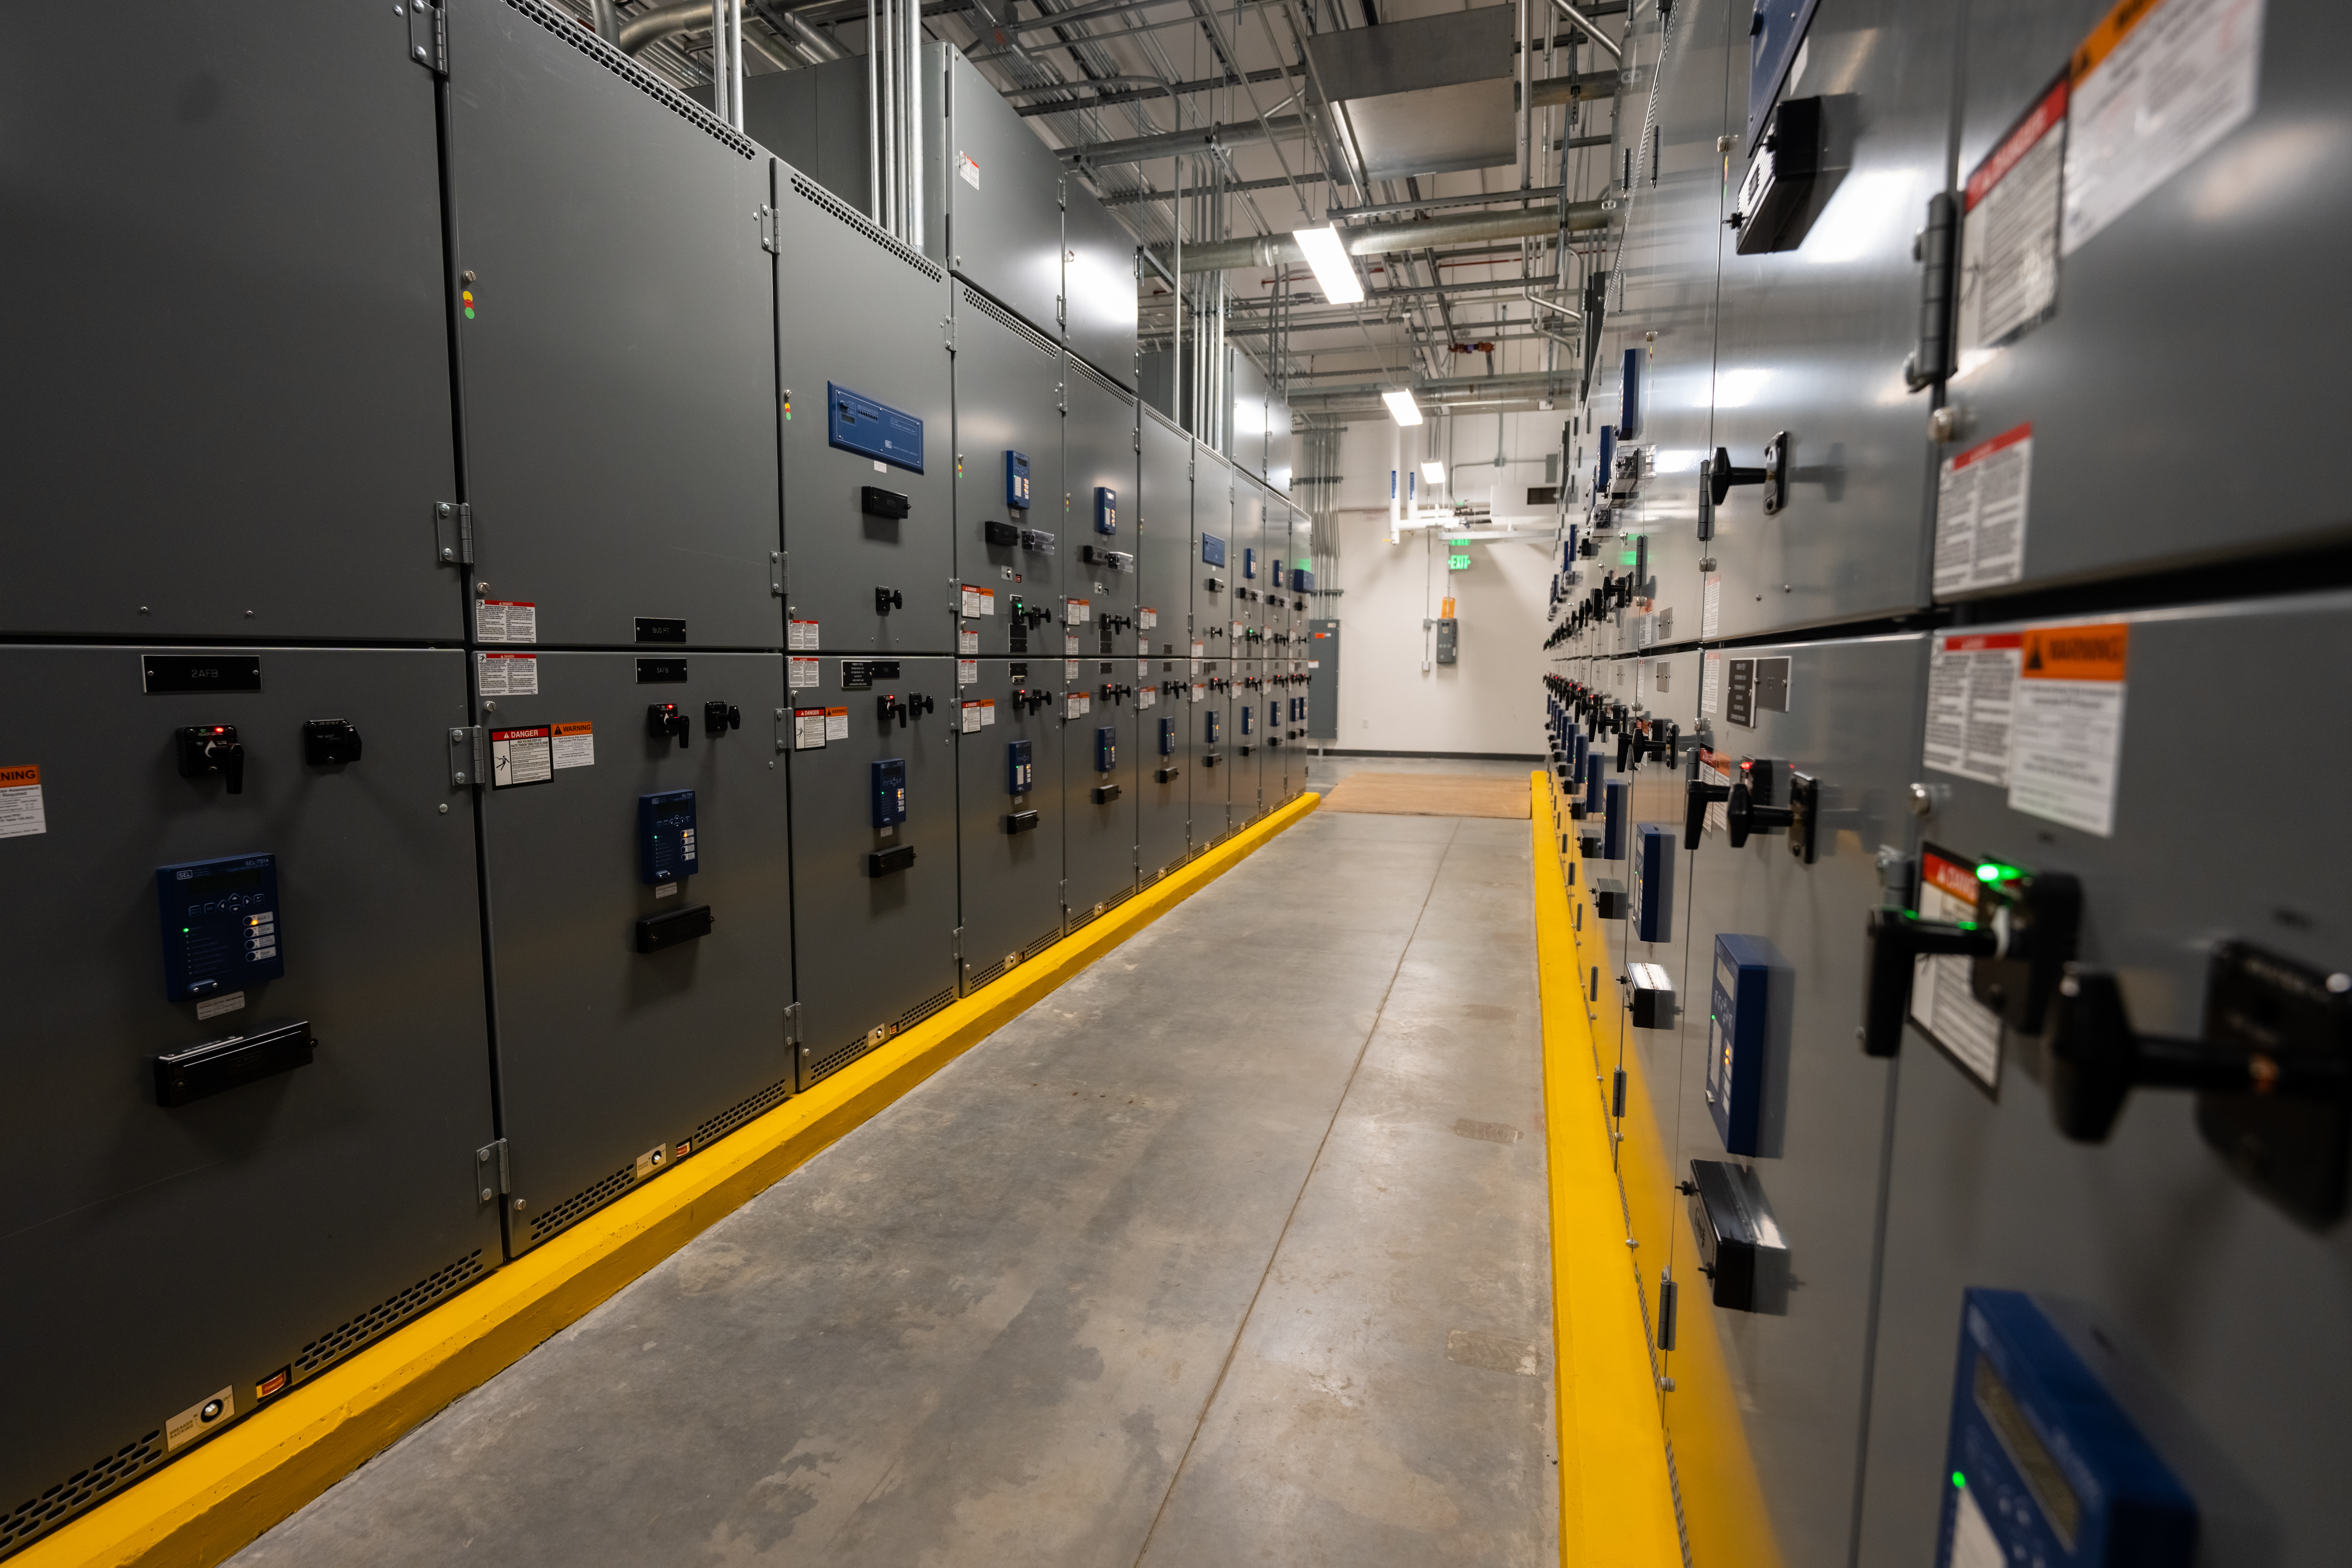 A photograph of an uninterruptable power supply system in a data center.